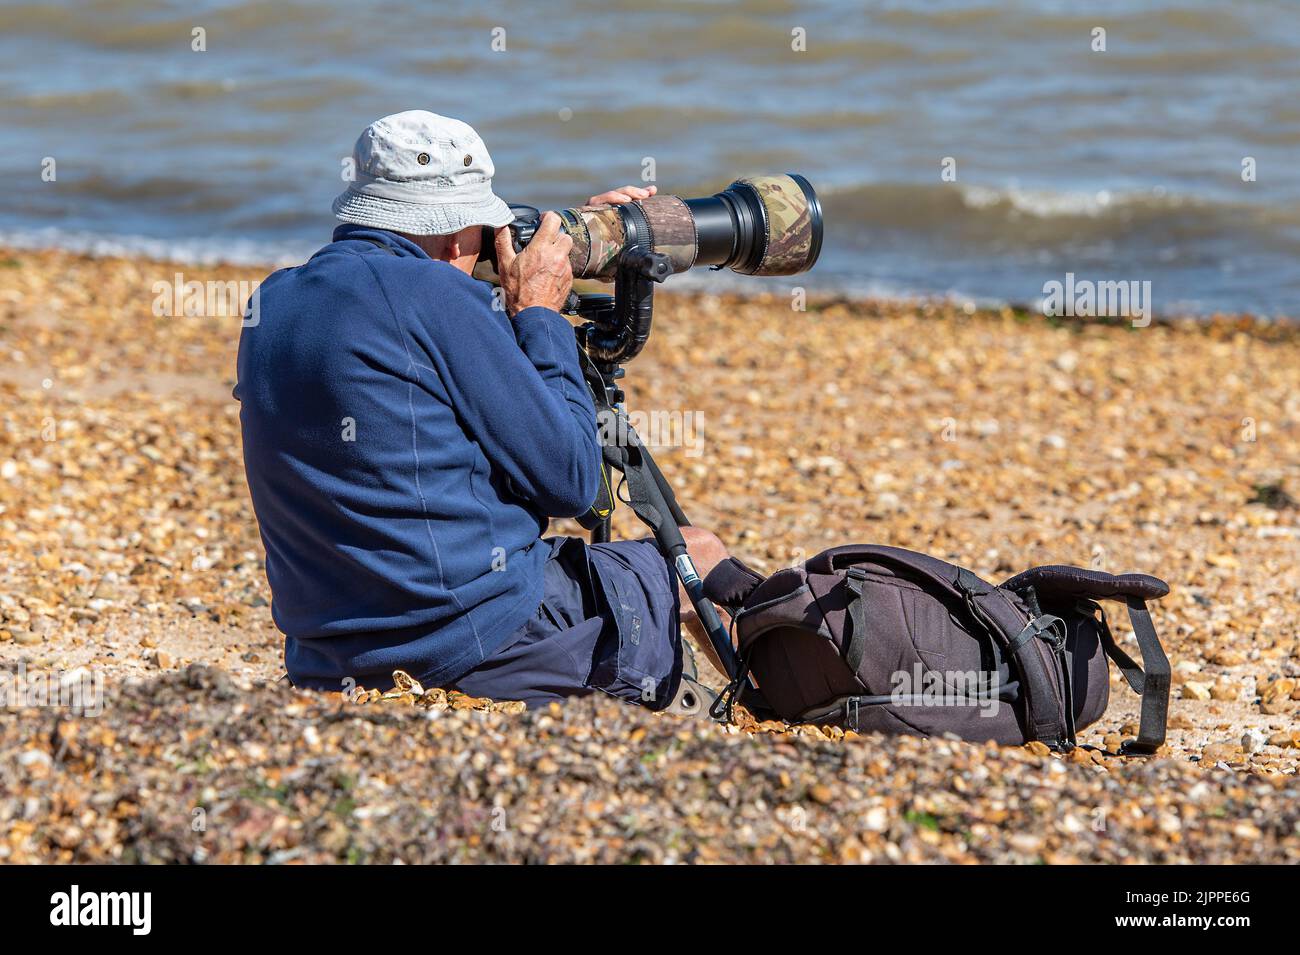 photographer using long telephoto lens taking pictures of yachts during the annual cowes week regatta on the isle of wight uk, photographer using lens Stock Photo